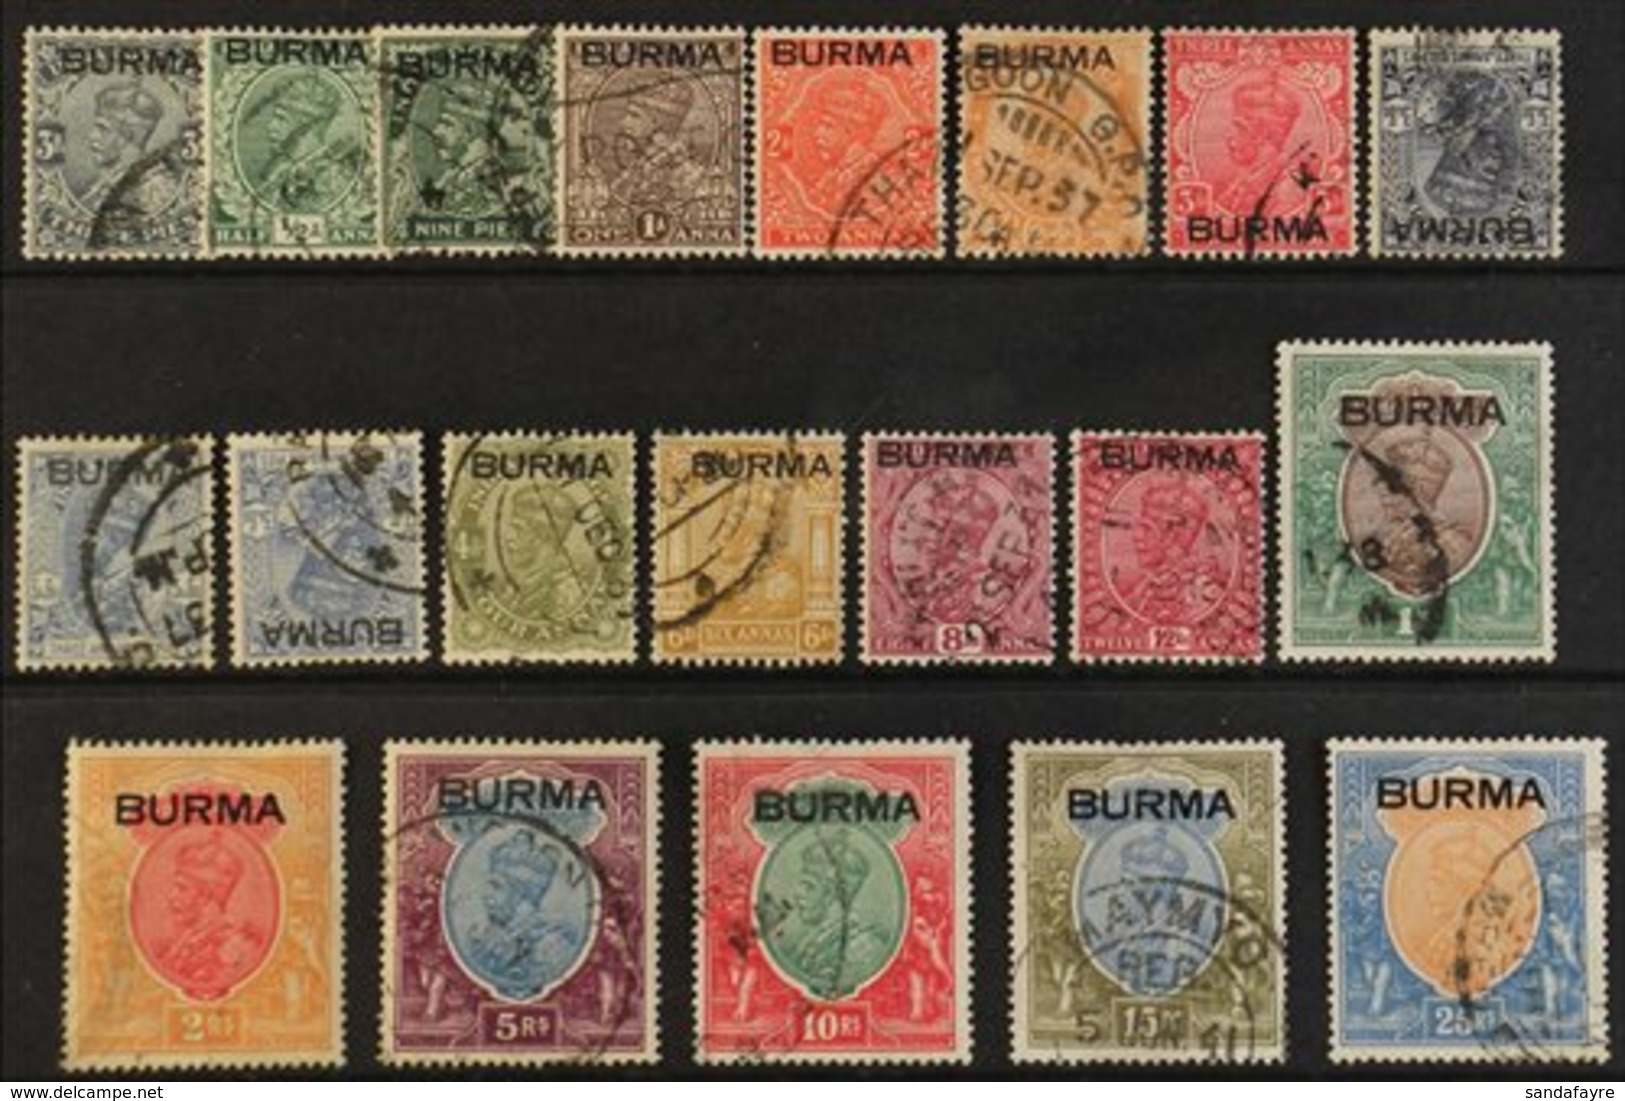 1937 KGV India Definitives Set Overprinted "BURMA" With Additional 3a6p Dull Blue, Both Wmk Upright & Inverted, SG 1/18, - Birmanie (...-1947)